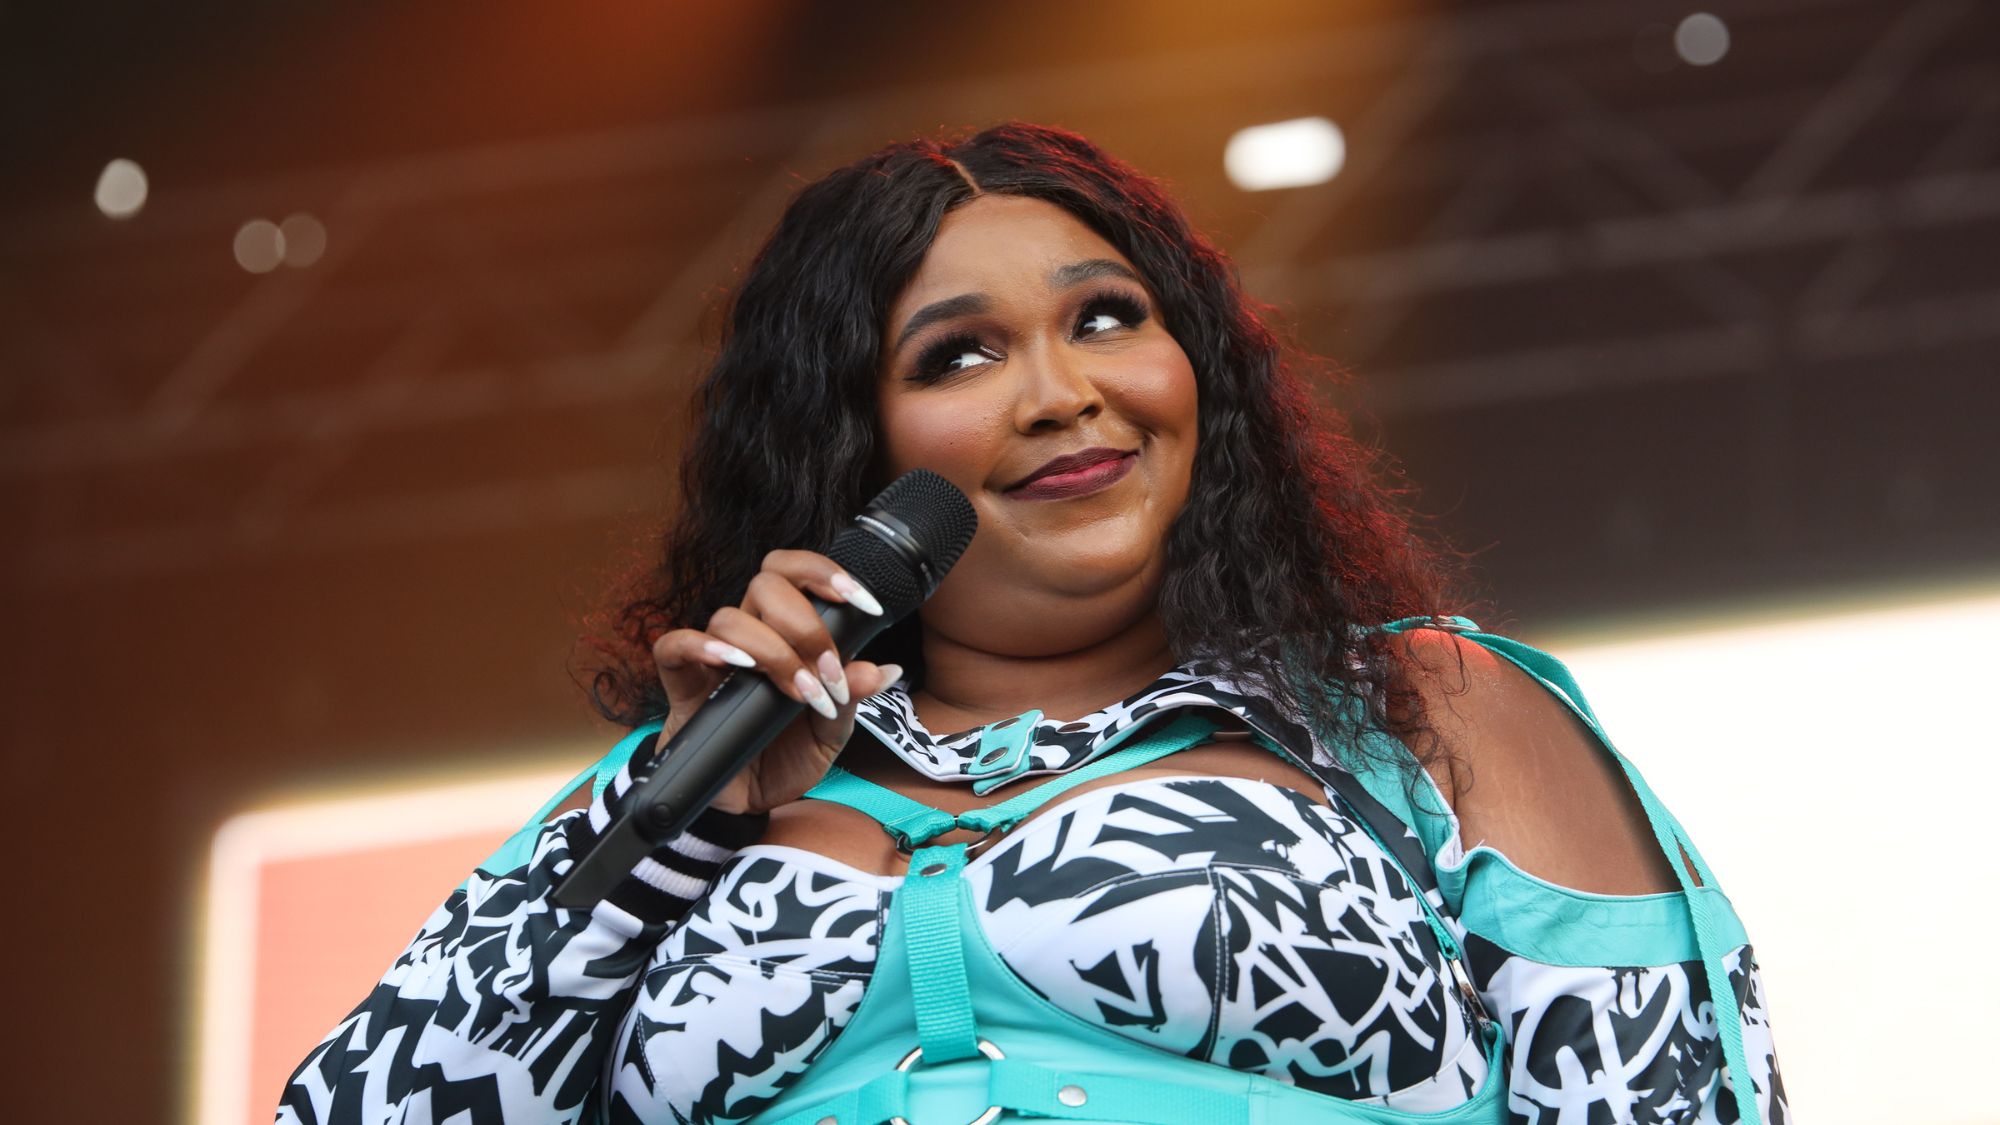 Lizzo performs on stage in a green, black and white top